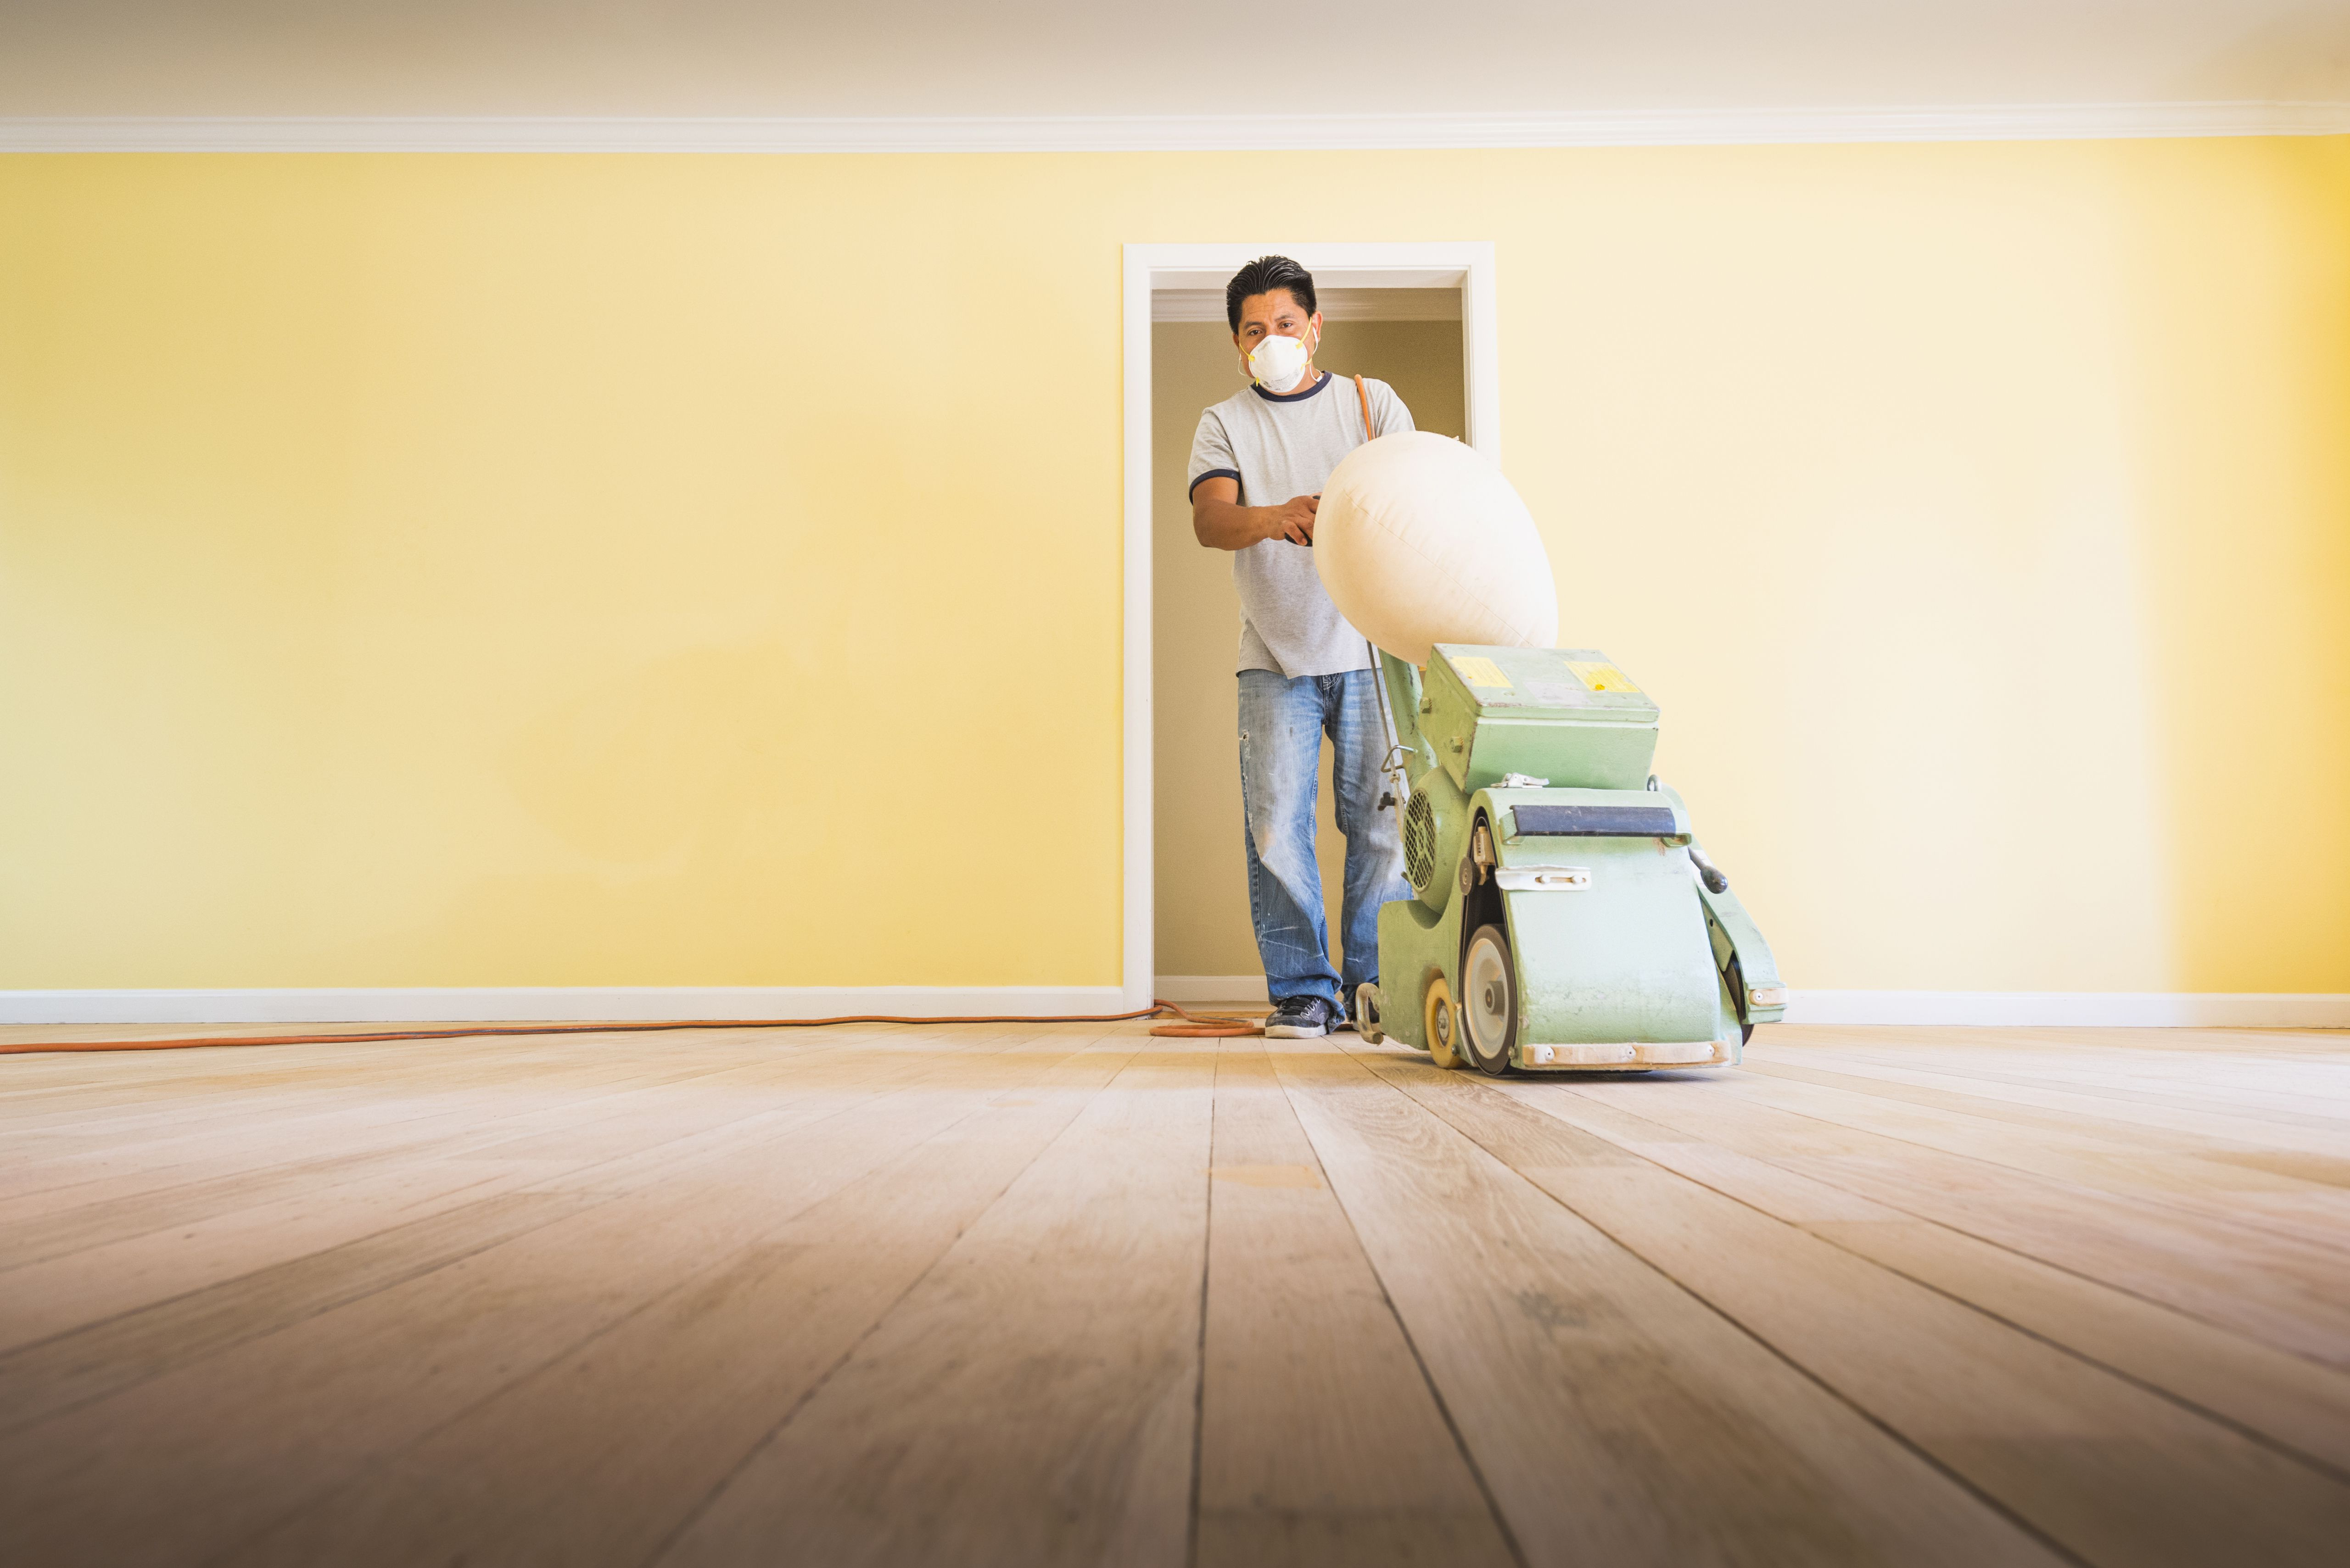 15 Awesome Knoxville Hardwood Floor Refinishing 2024 free download knoxville hardwood floor refinishing of should you paint walls or refinish floors first within floorsandingafterpainting 5a8f08dfae9ab80037d9d878